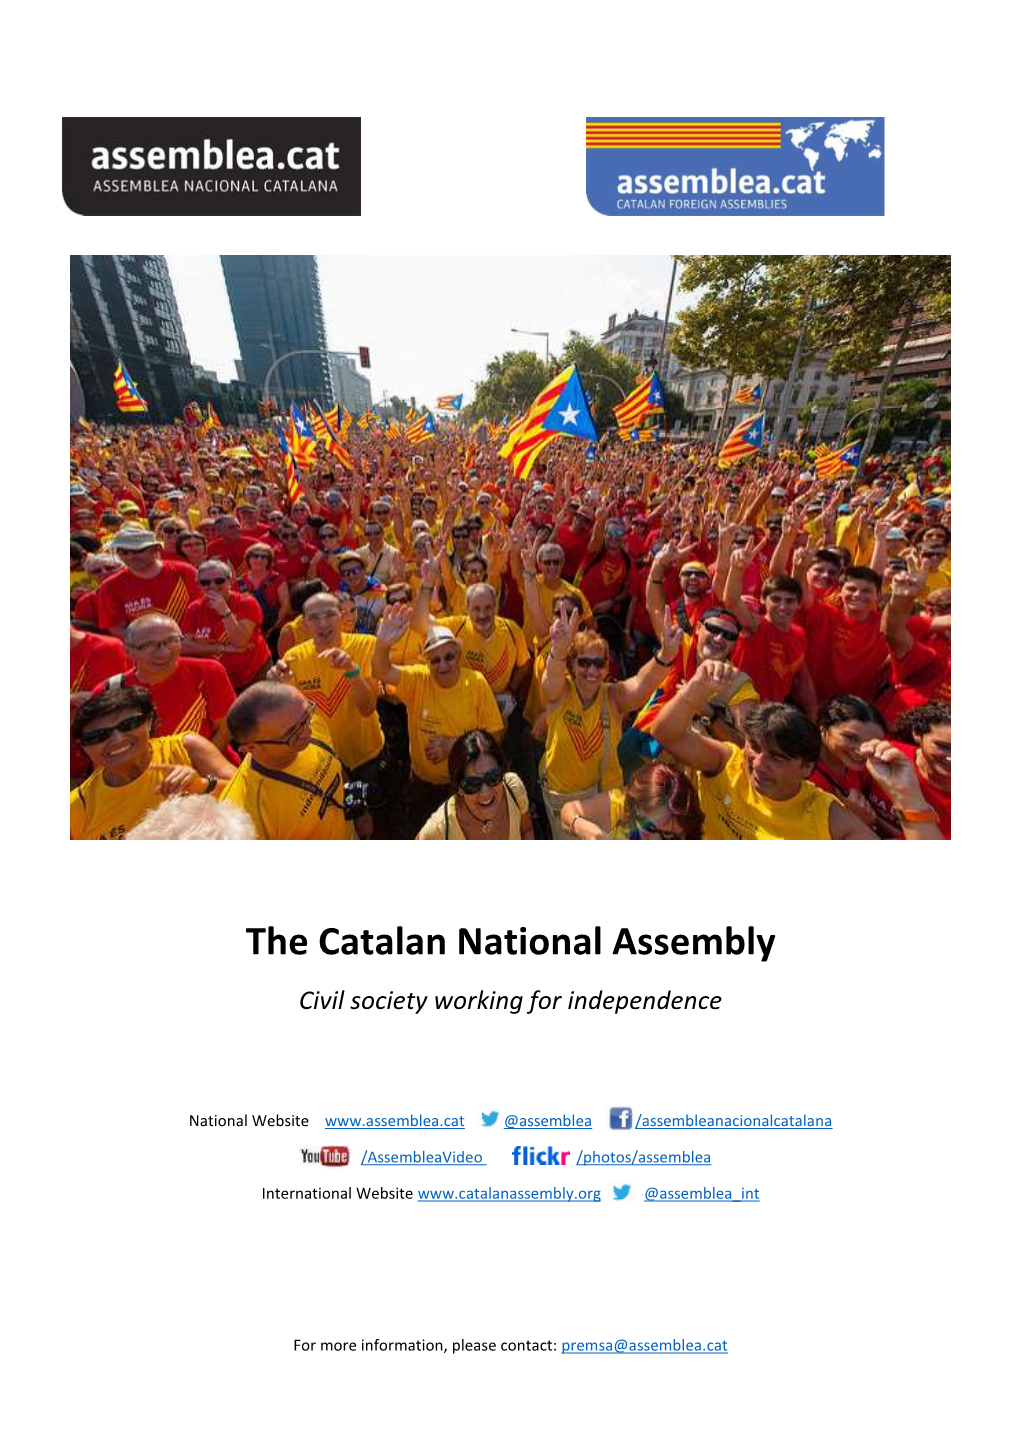 The Catalan National Assembly Civil Society Working for Independence